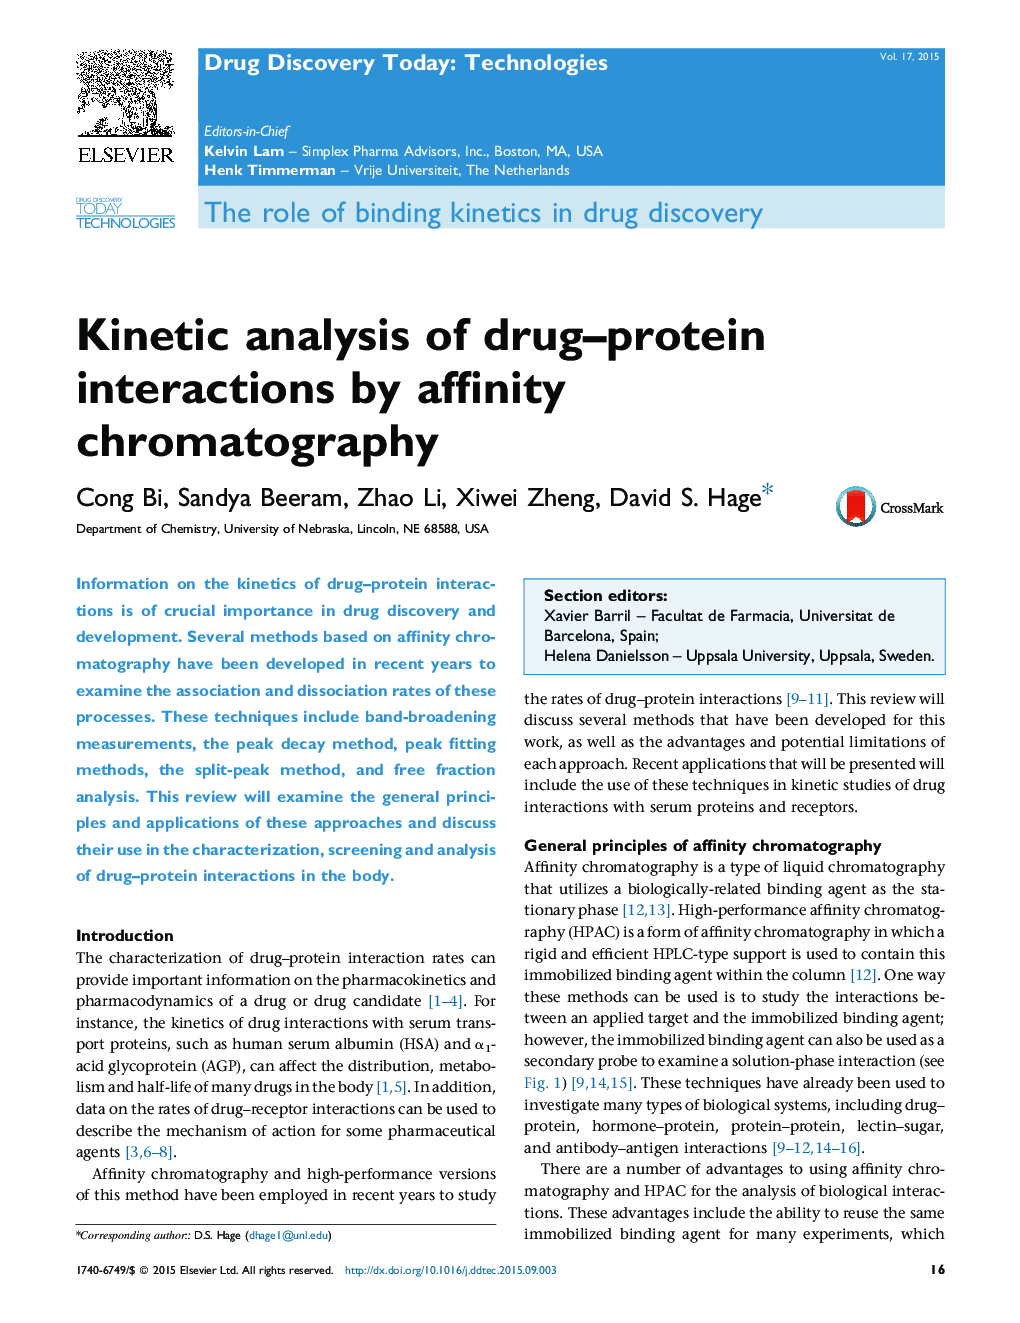 Kinetic analysis of drug–protein interactions by affinity chromatography